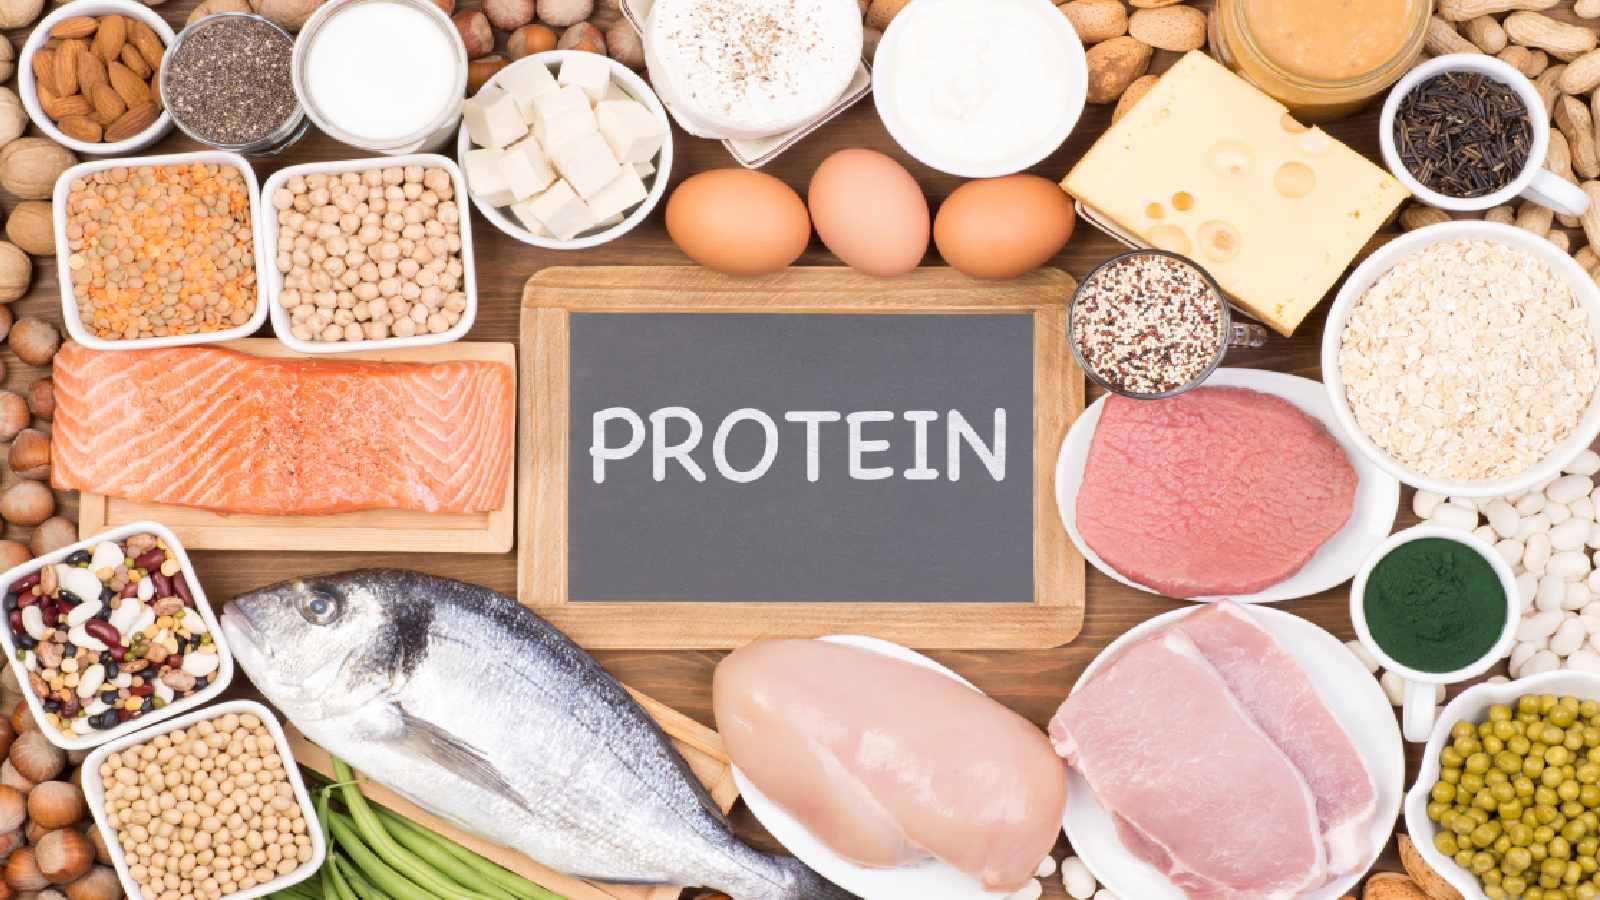 Protein is essential for healthy bones and muscles.